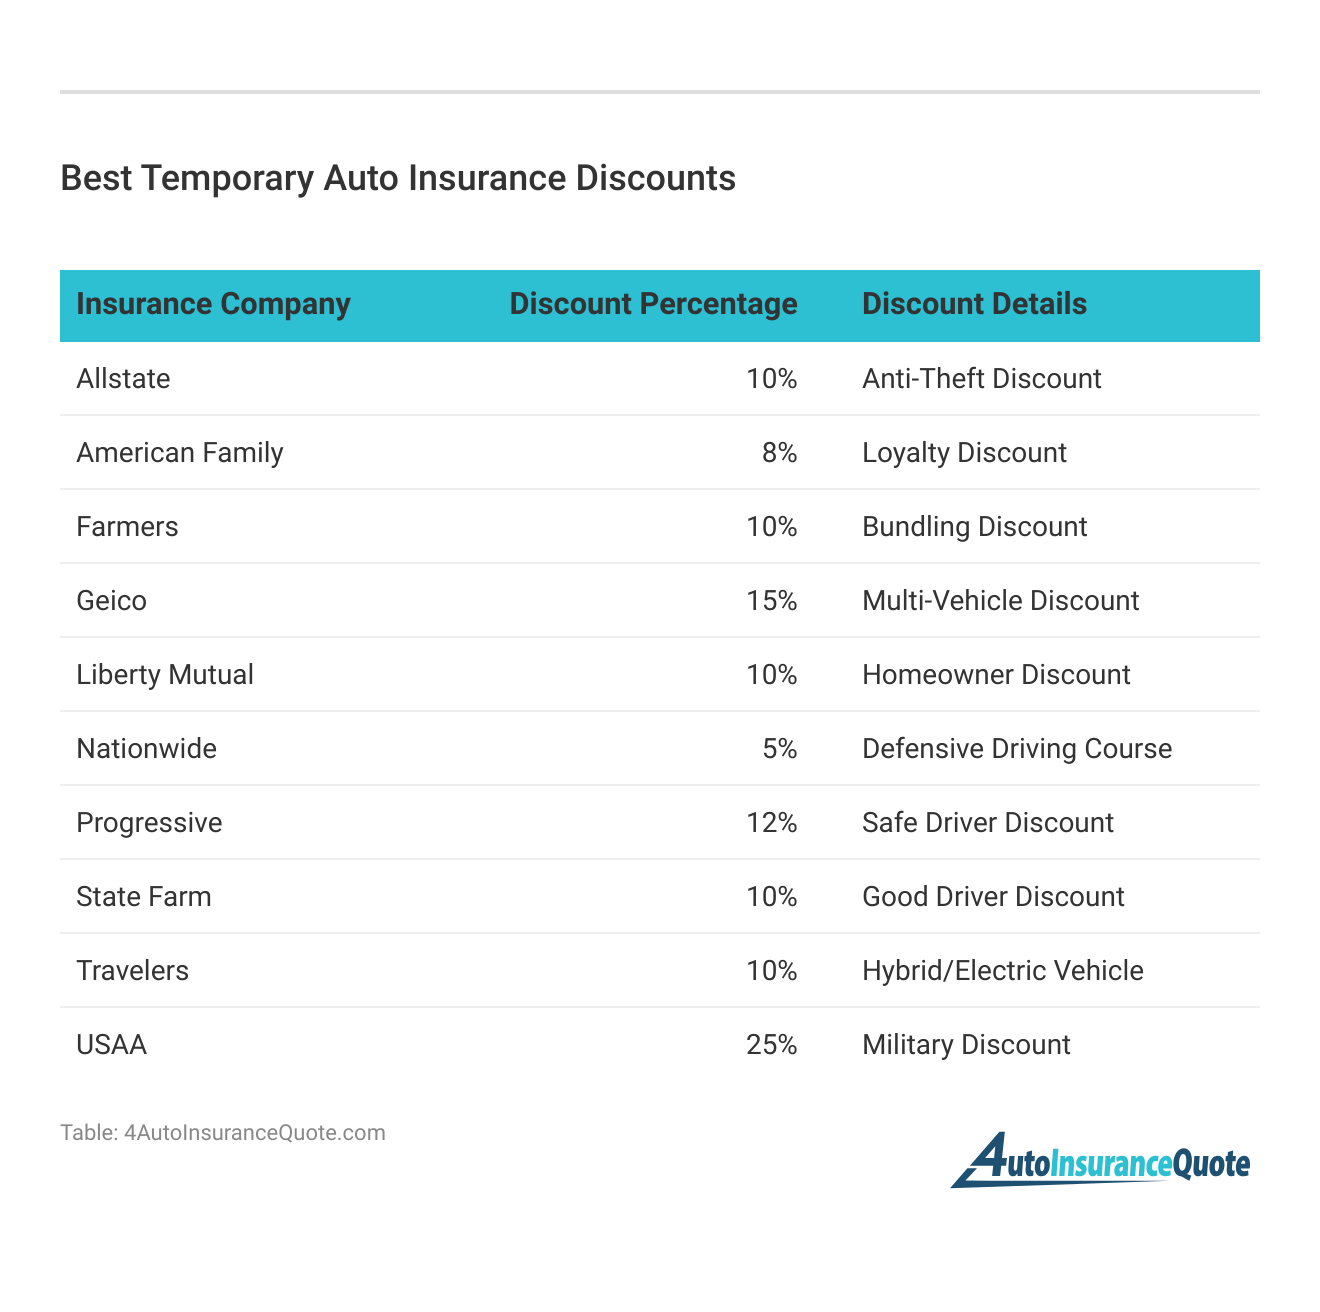 <h3>Best Temporary Auto Insurance Discounts</h3>